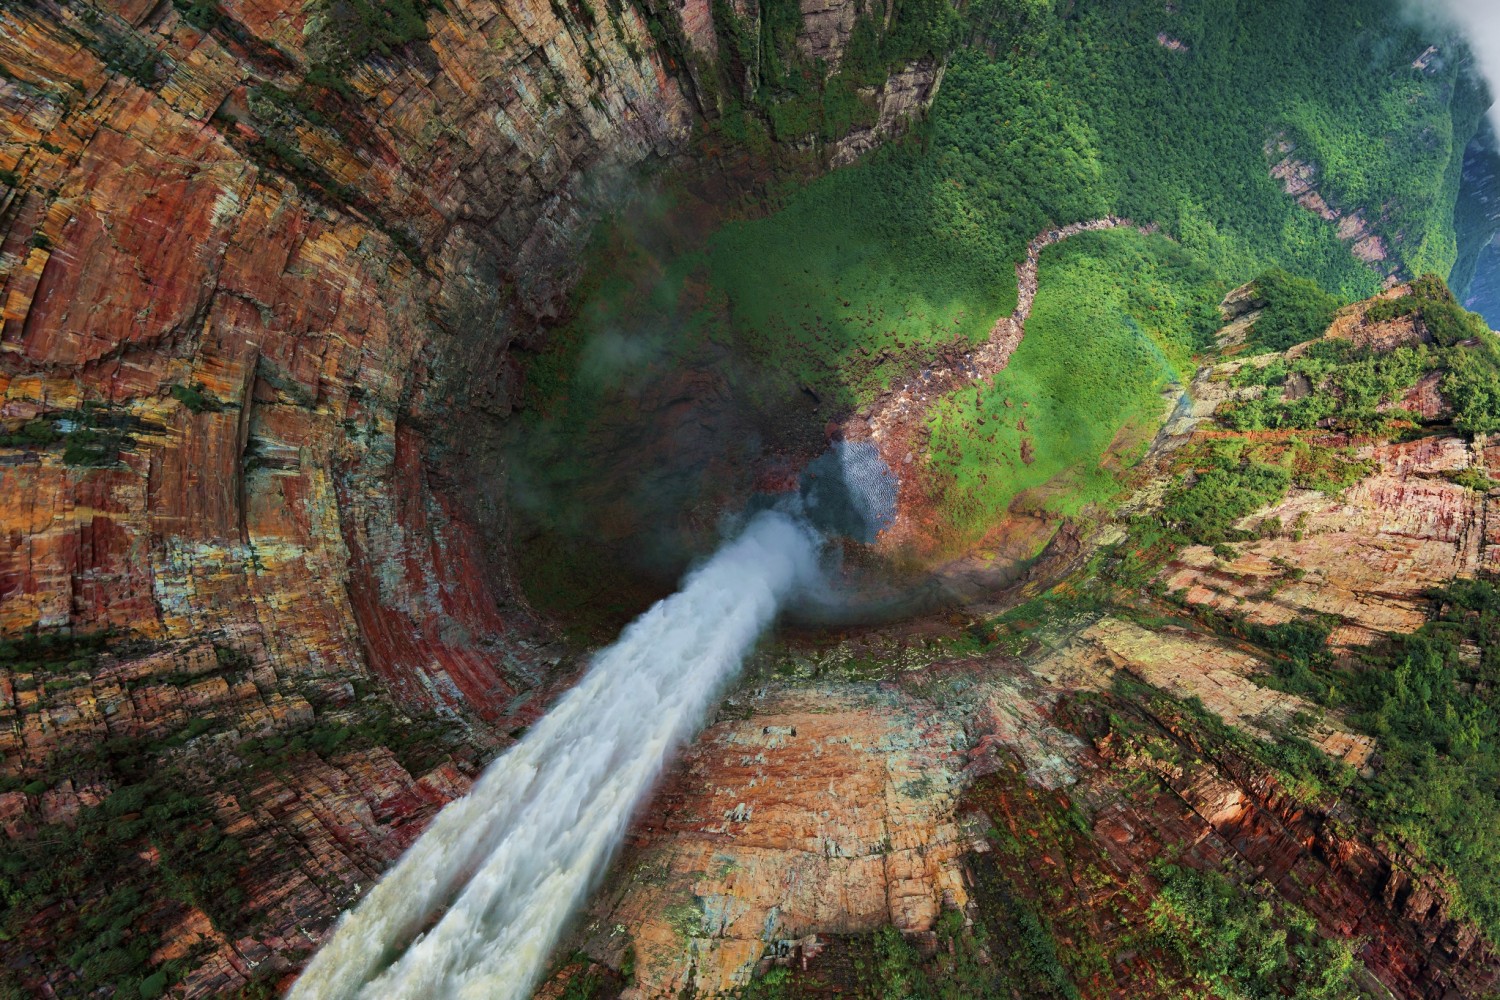 This Group of Photo Enthusiasts Travel the Globe Creating Astonishing Aerial Panoramas